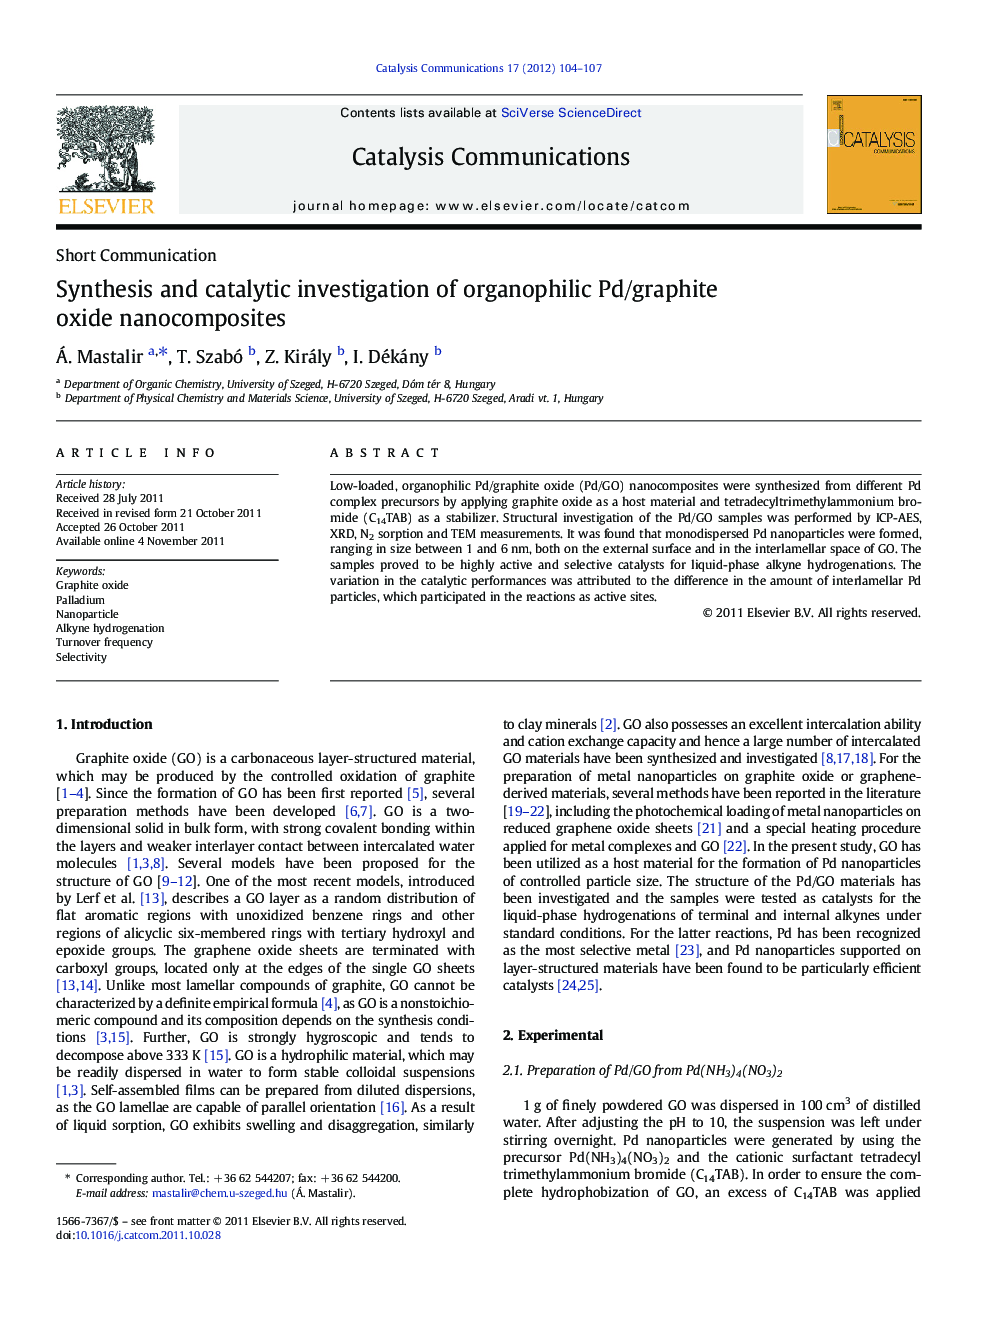 Synthesis and catalytic investigation of organophilic Pd/graphite oxide nanocomposites